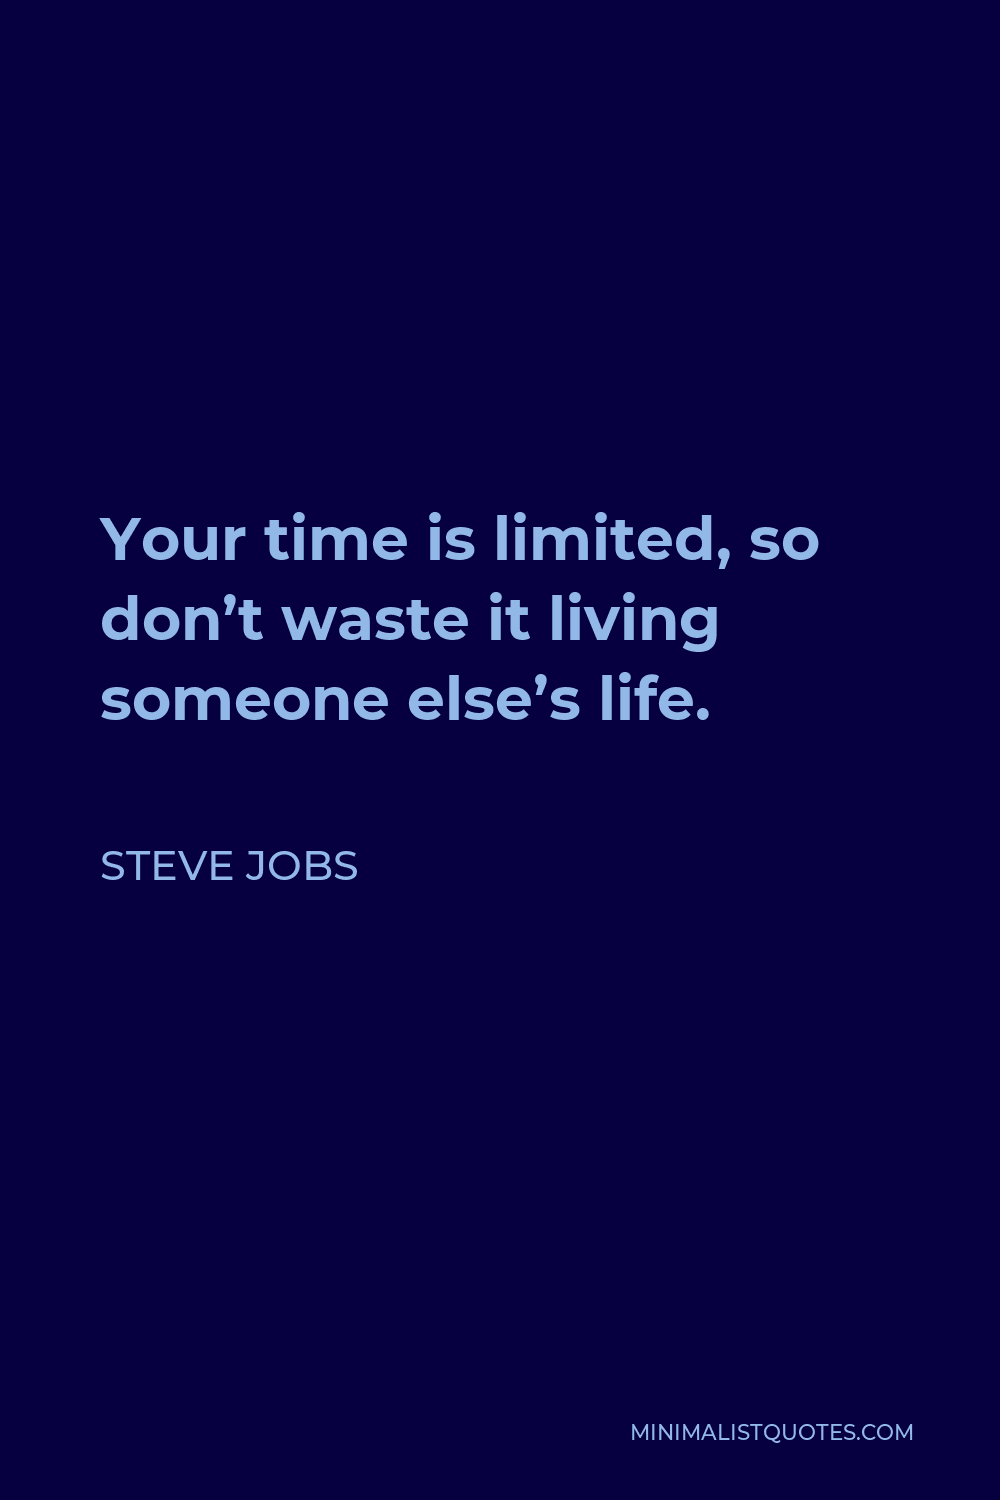 Steve Jobs Quote - Your time is limited, so don’t waste it living someone else’s life.